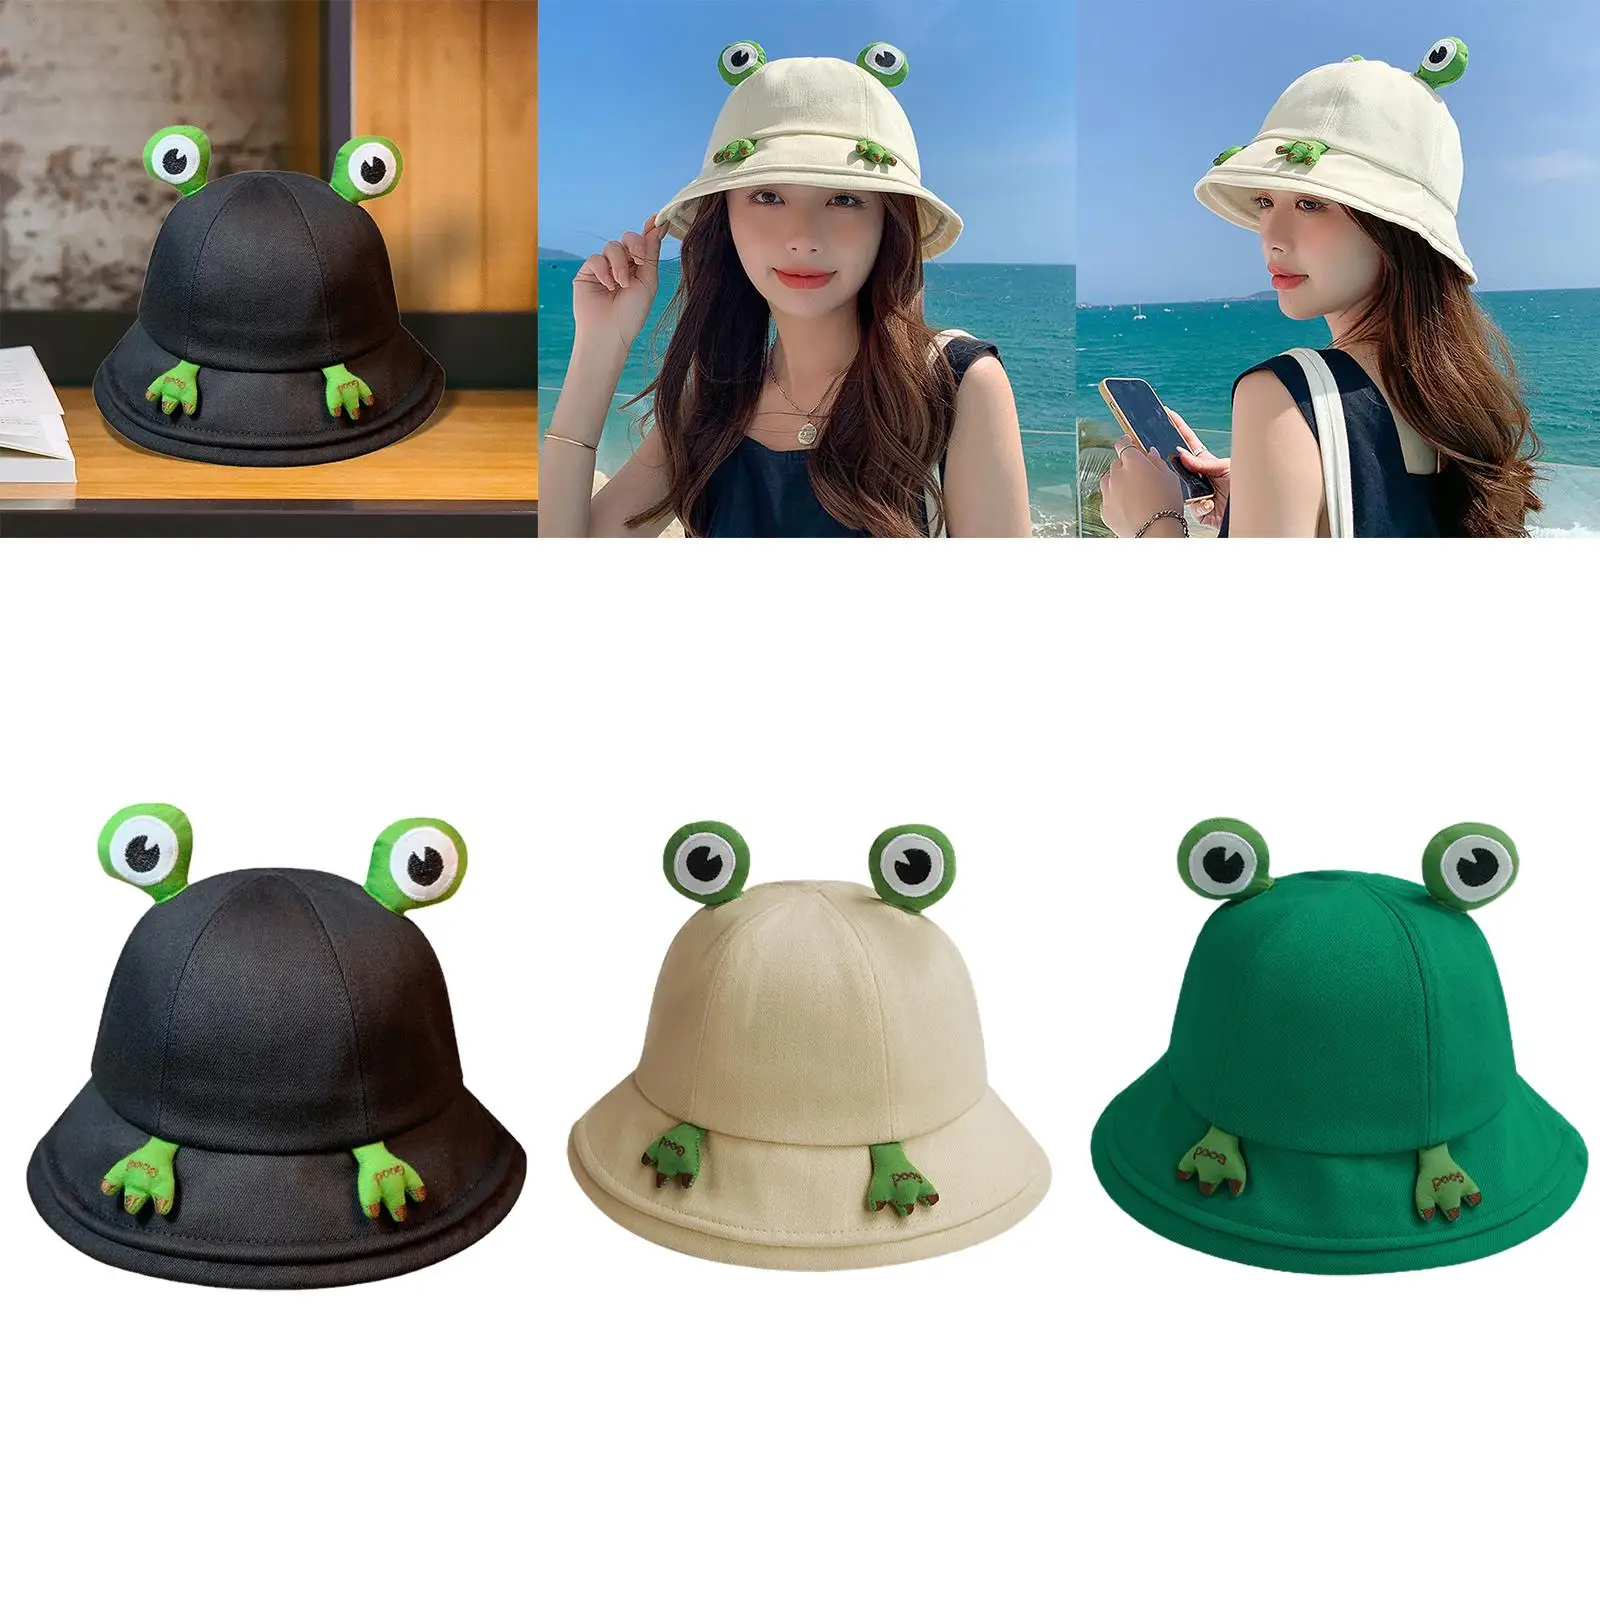 Frog Bucket Hat Party Hat Adjustable Photo Props Sun Protection Cotton Fisherman Caps for Dress up Outdoor Travel Spring Girls